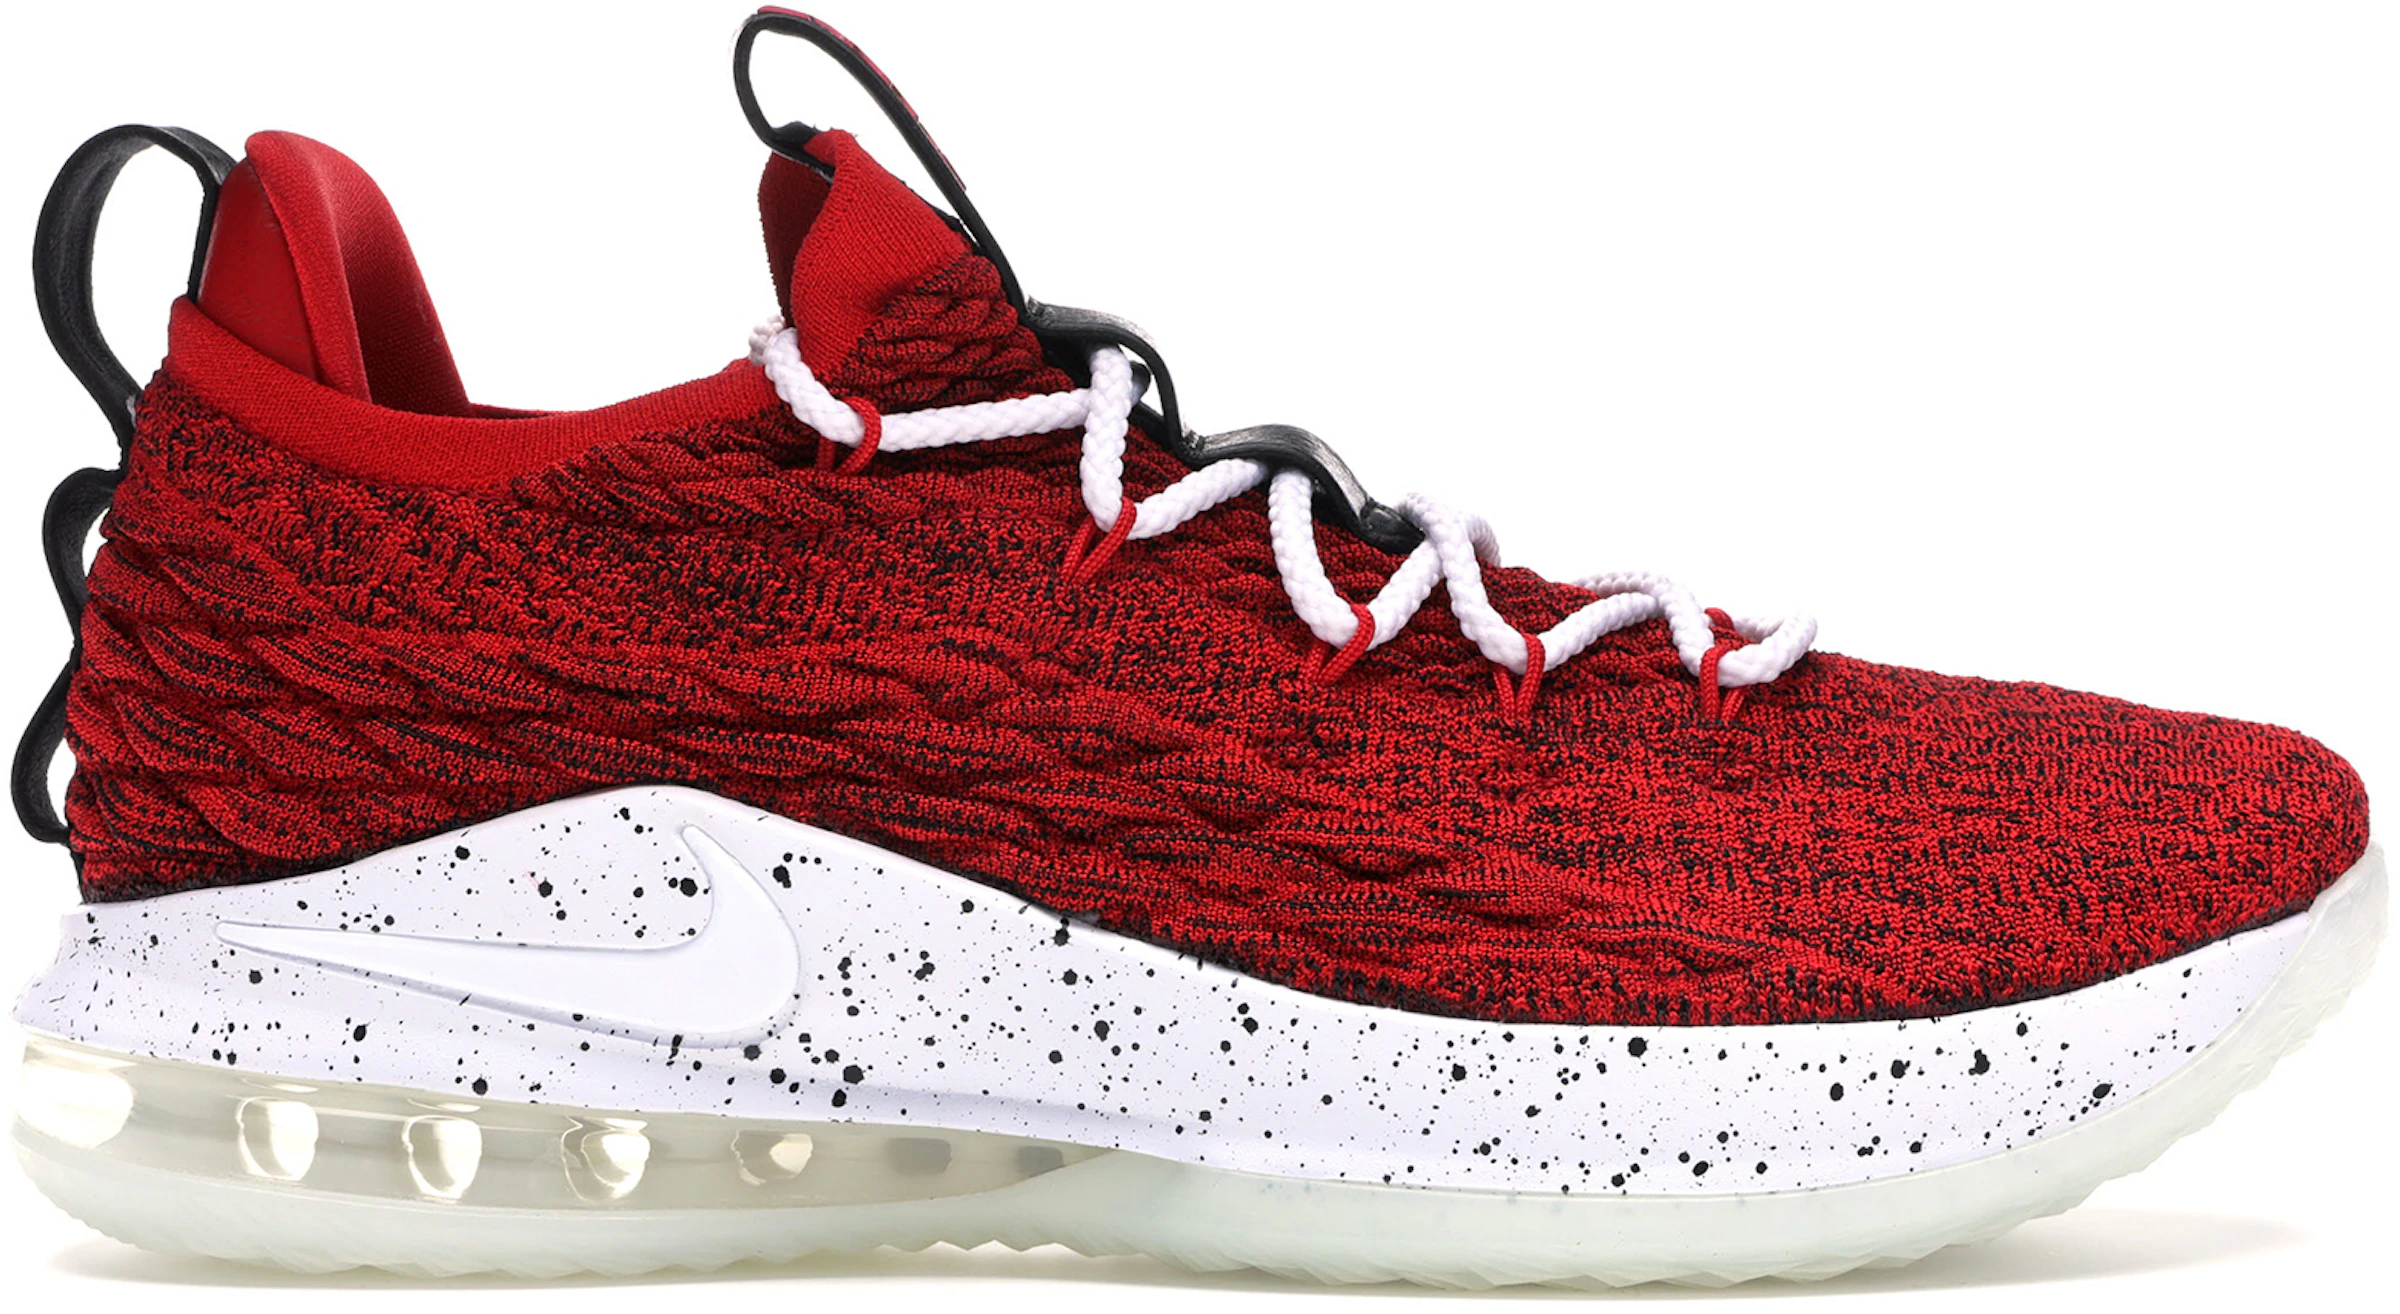 Lebron 15 - All Sizes & Colorways at StockX